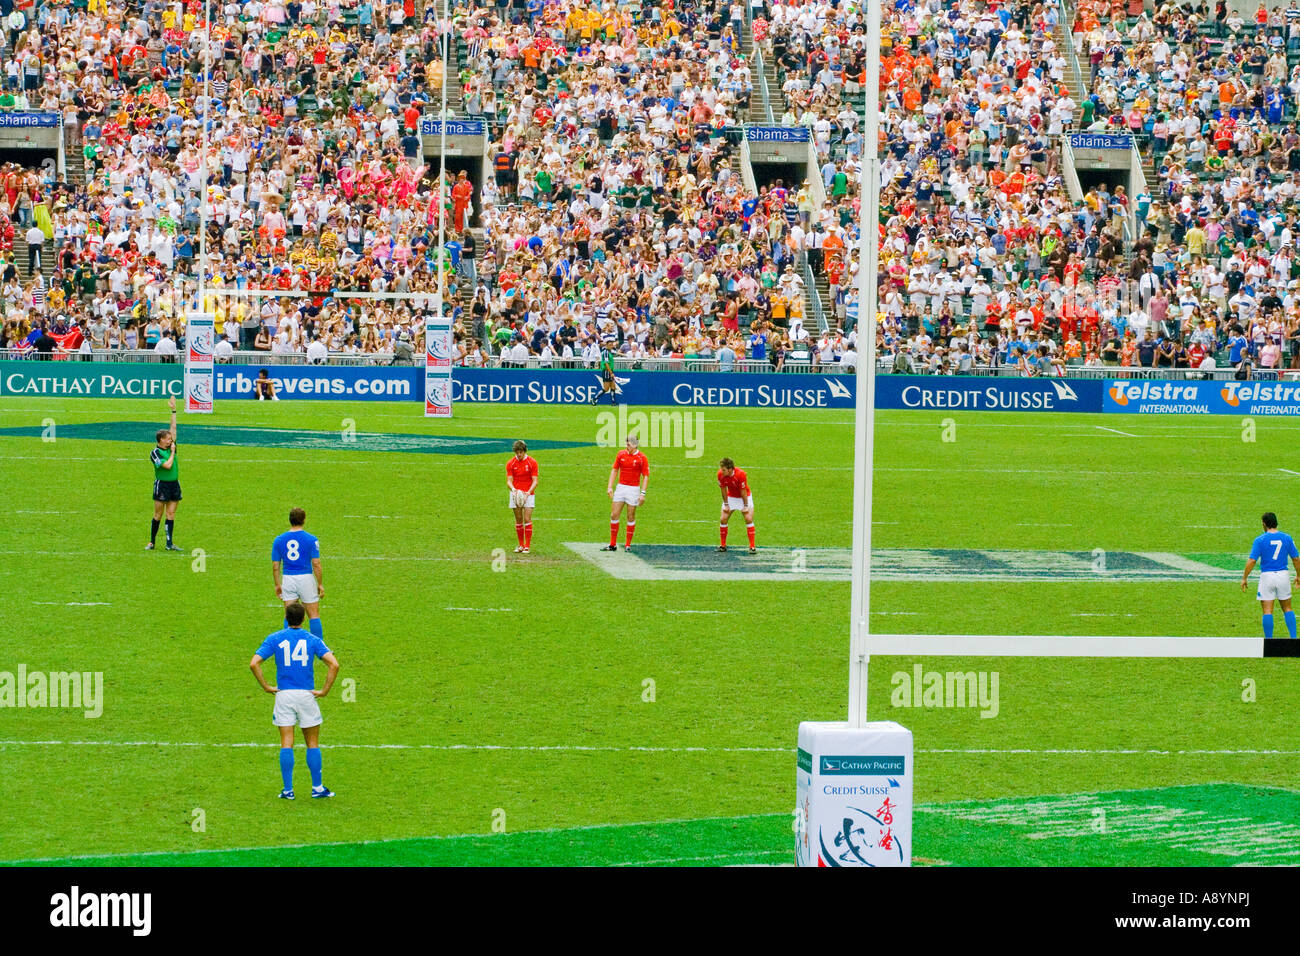 Wales Team Playing in Hong Kong Sevens Rugby 2007 Stock Photo